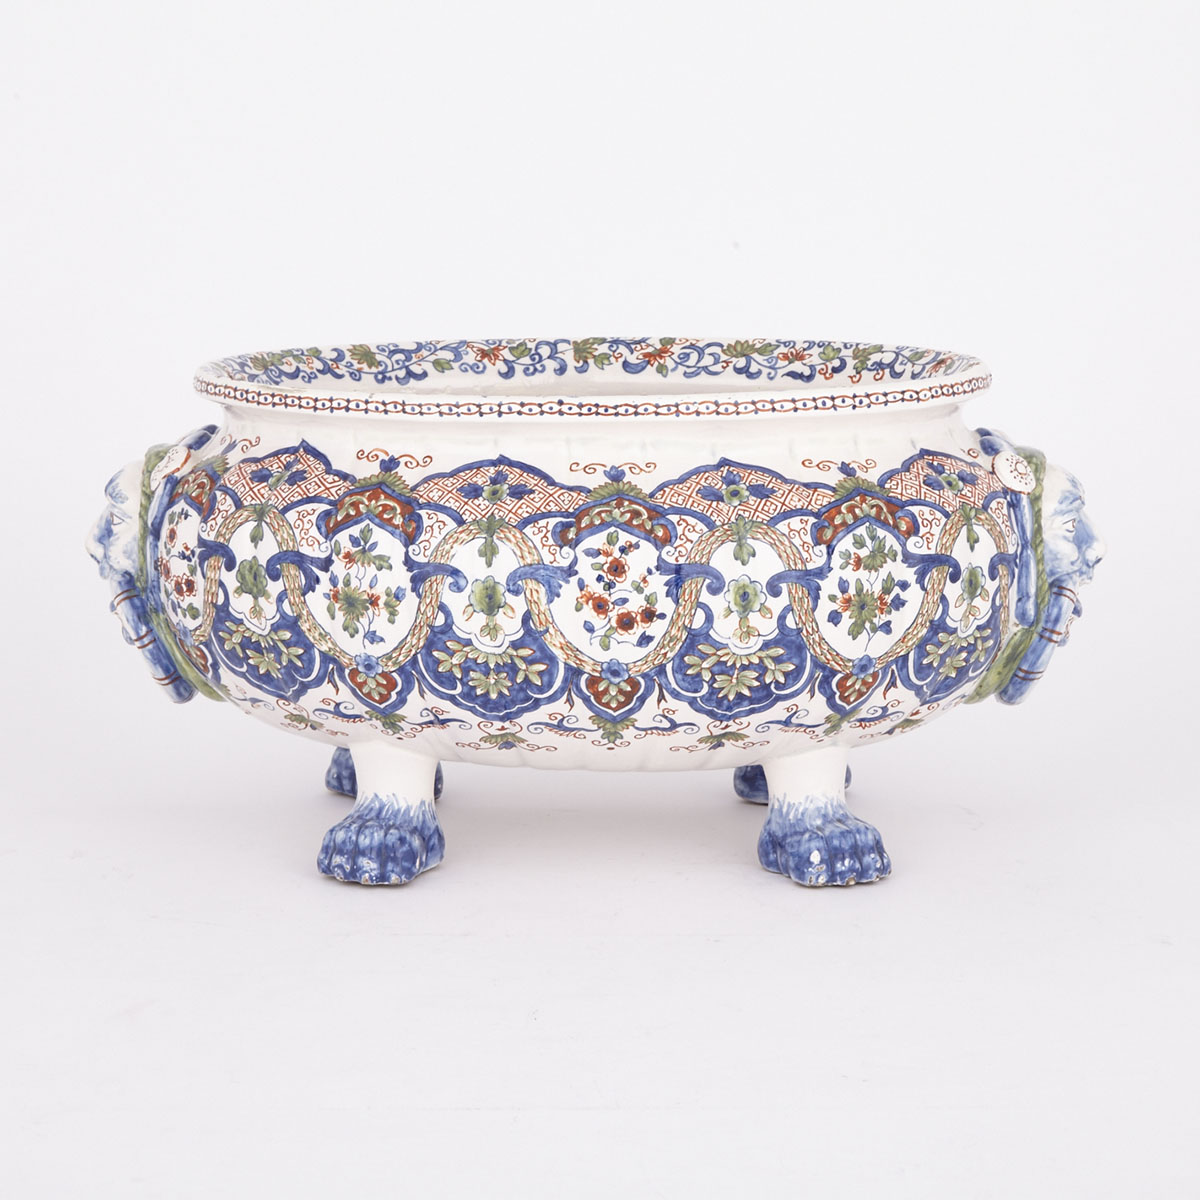 Delft Moulded and Polychrome Decorated Oval Jardinière, 20th century